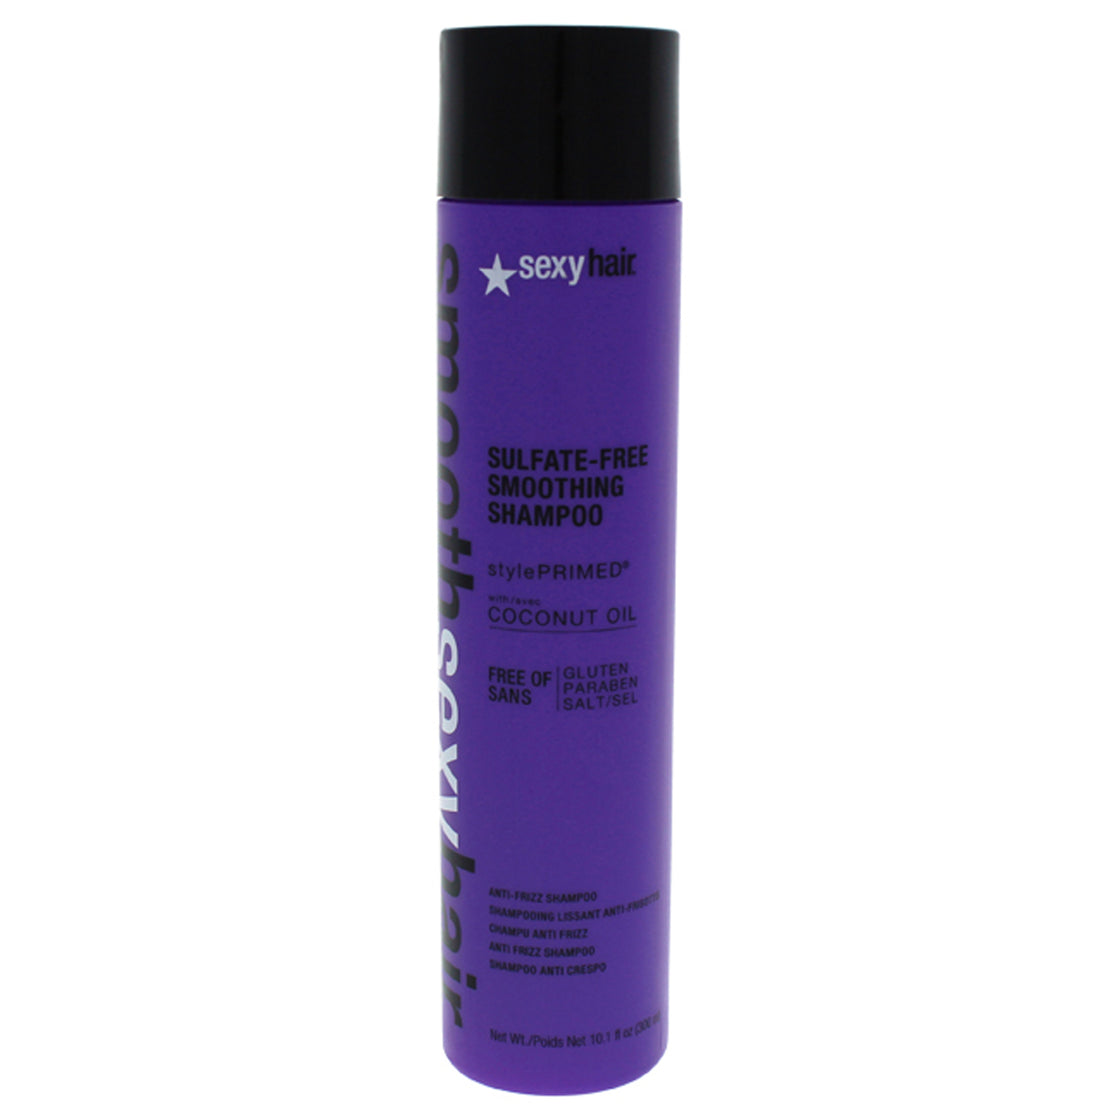 Smooth Sexy Hair Sulfate-Free Smoothing Shampoo by Sexy Hair for Unisex - 10.1 oz Shampoo